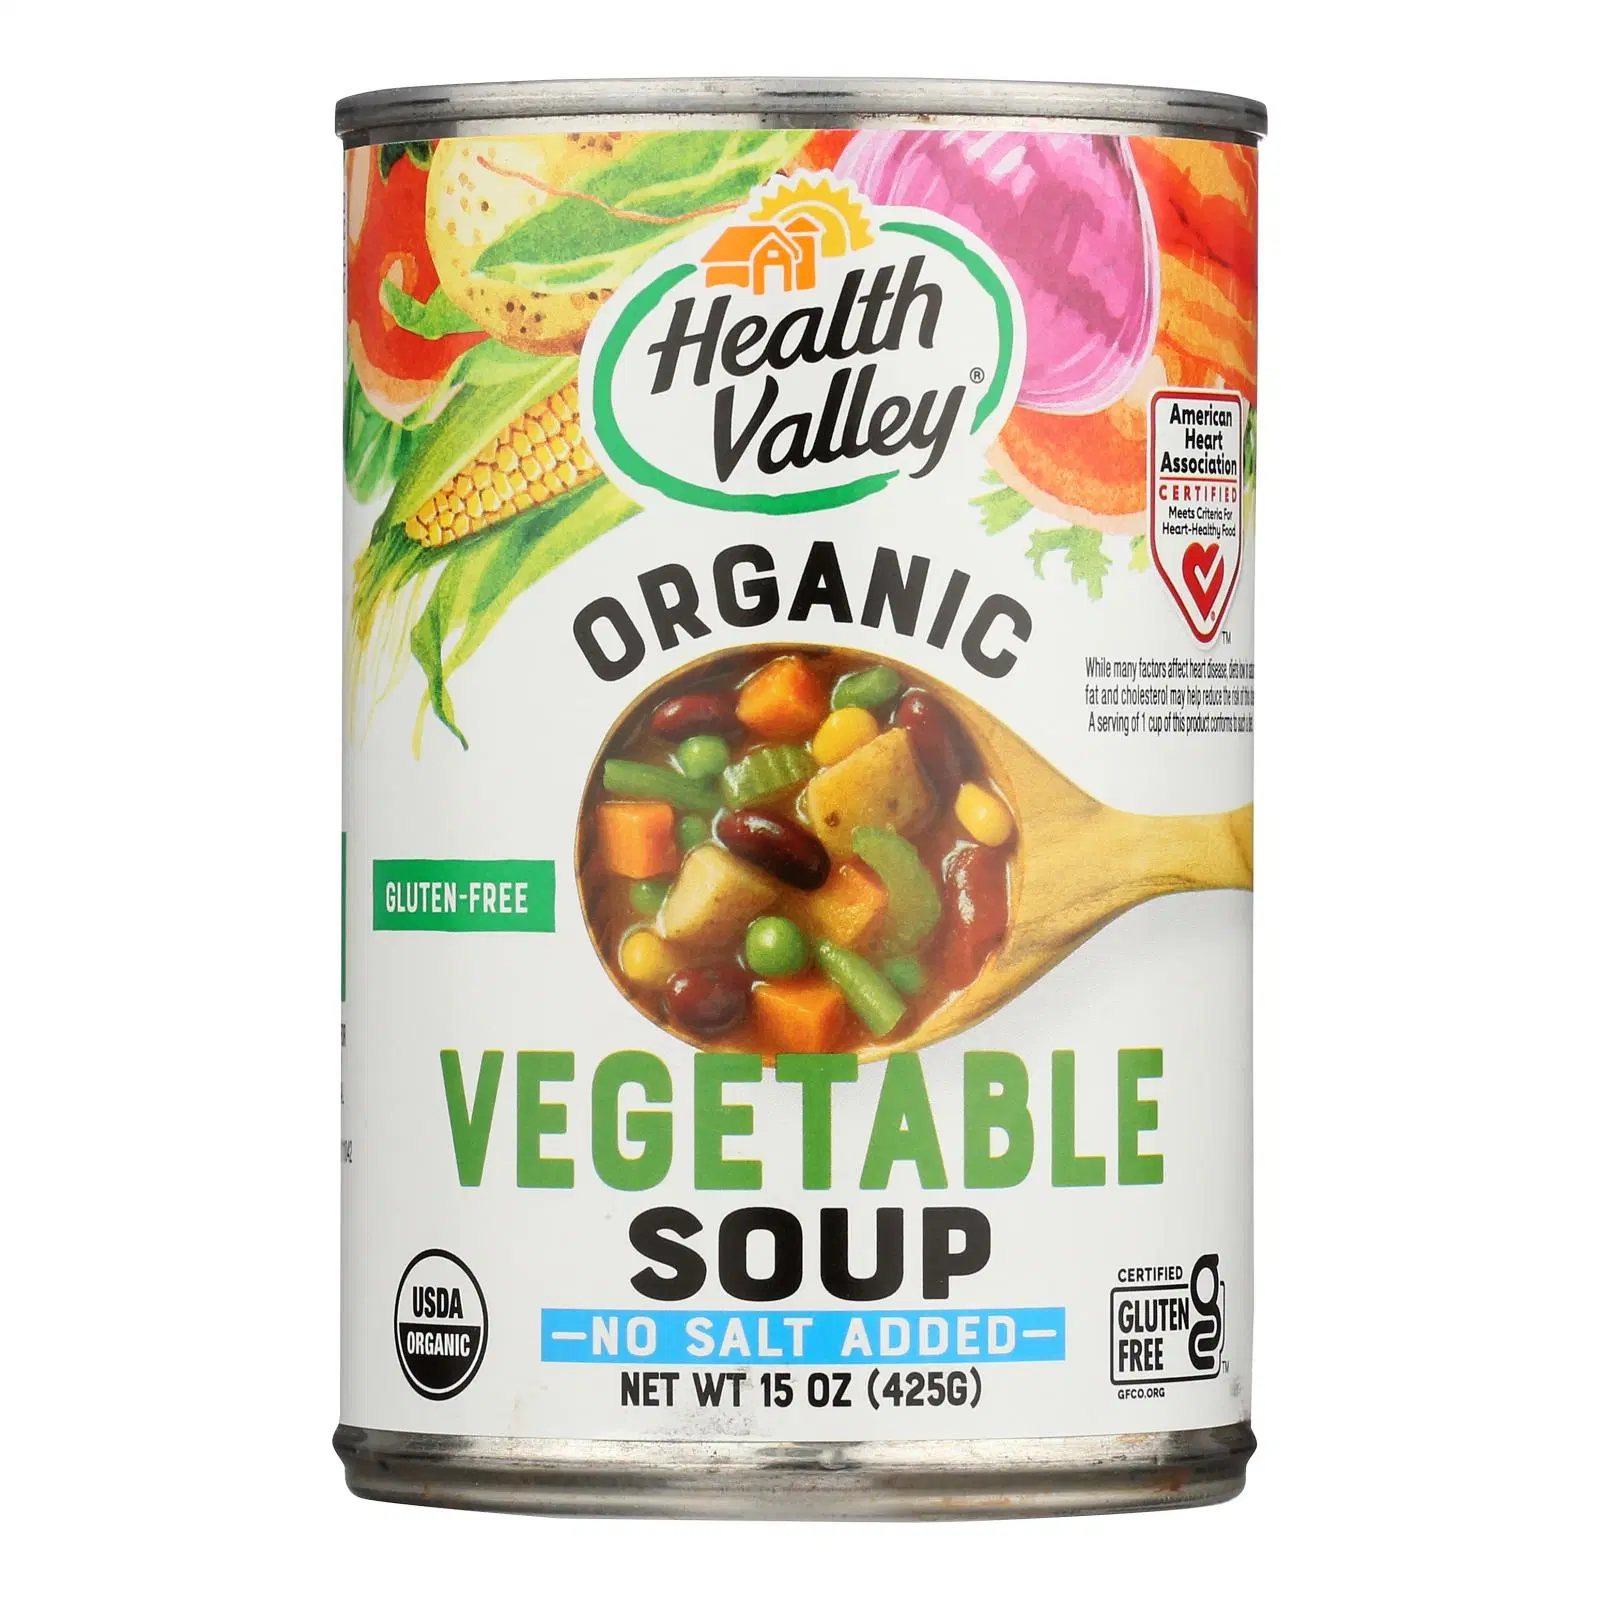 Health Valley Organic Vegetable Soup, 15 oz Can Case of 6, no added salt - $72.99